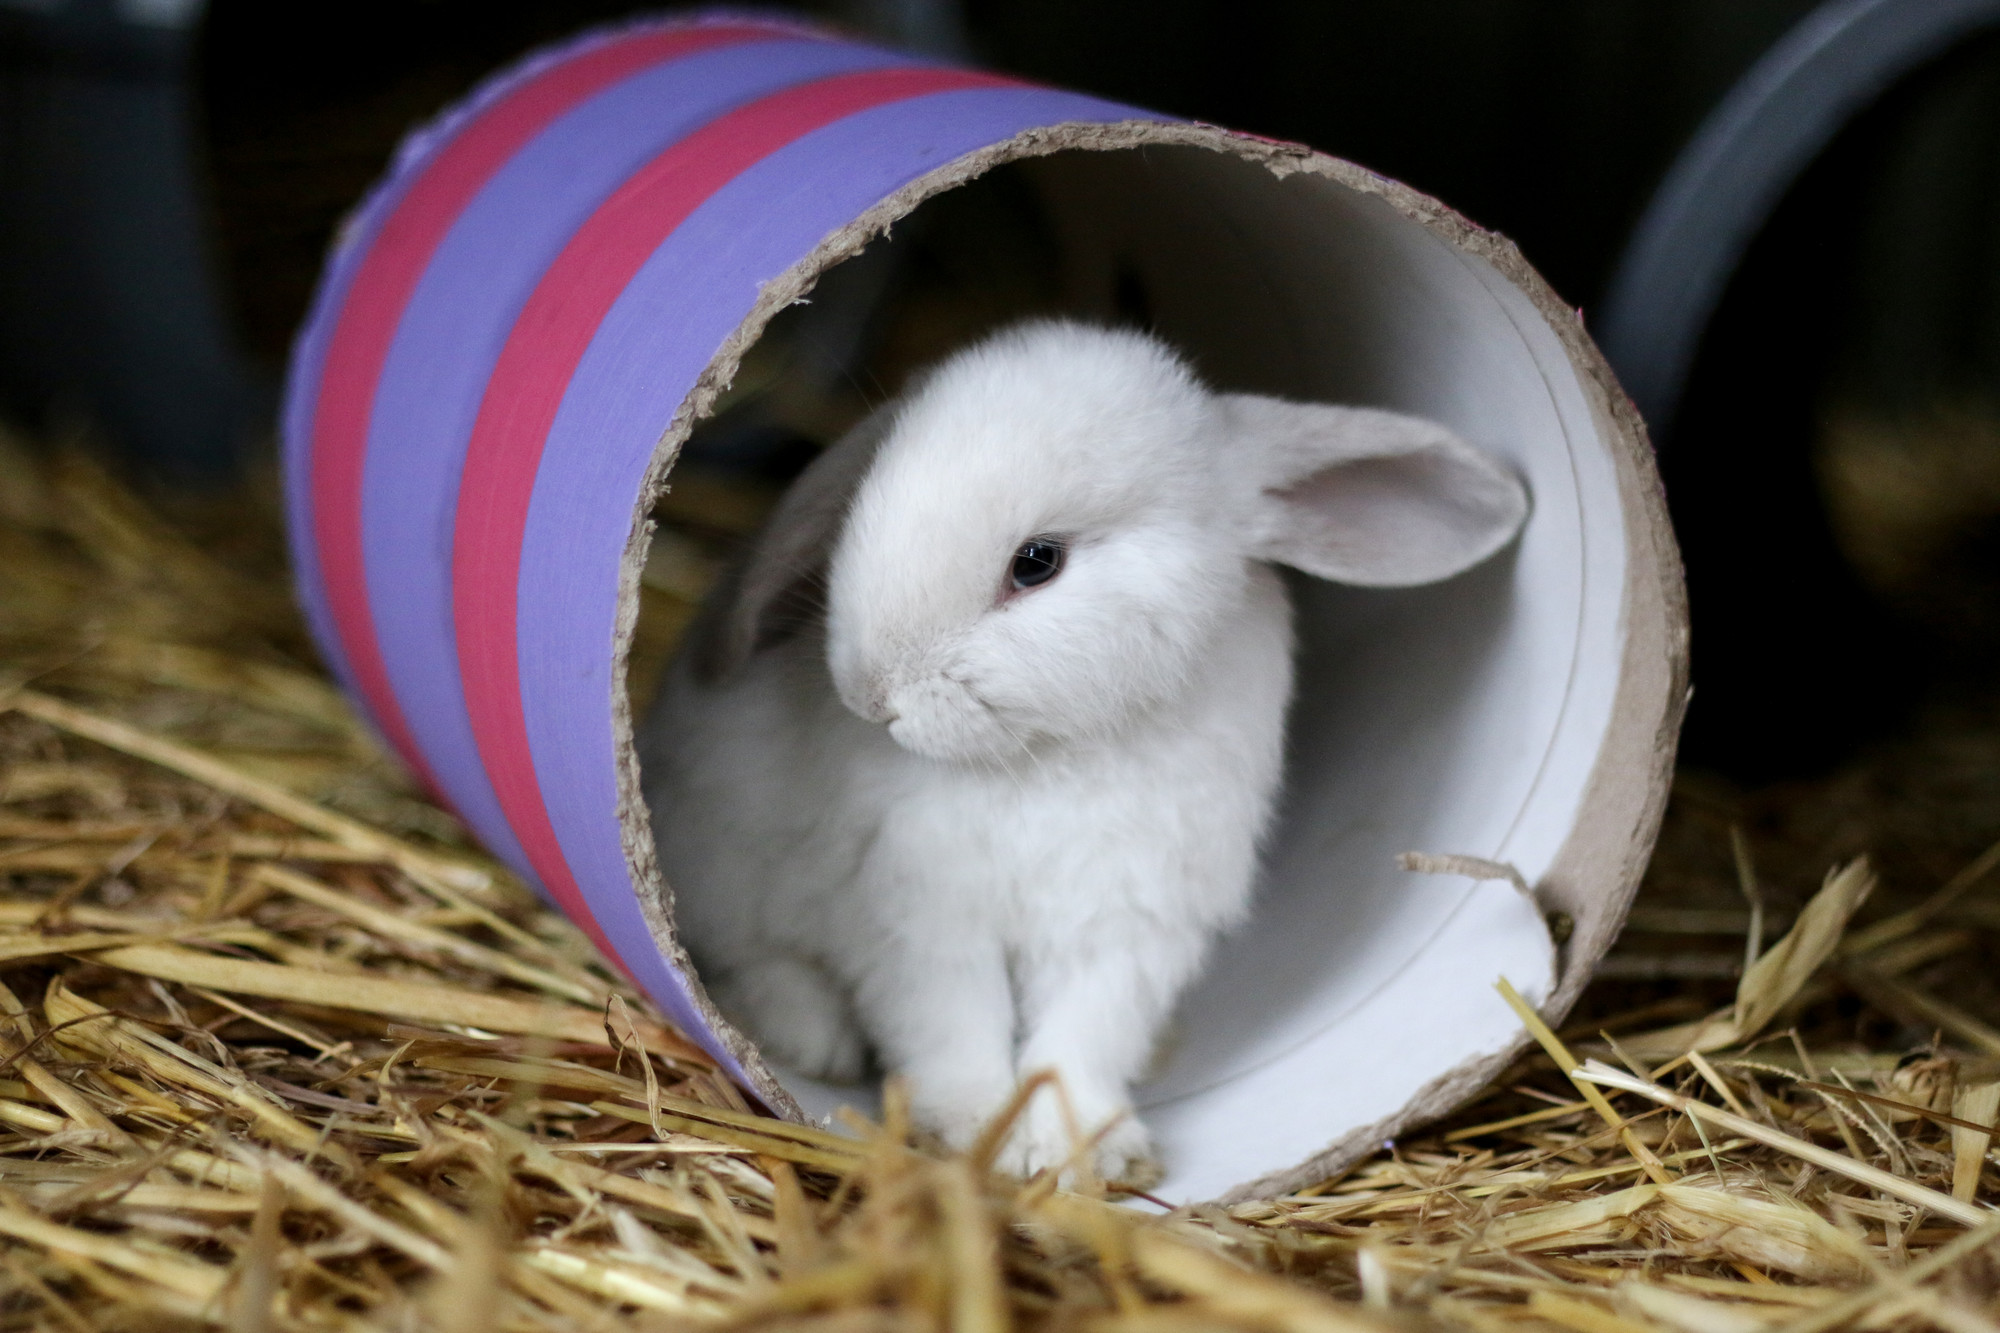 A young white rabbit grooms themselves in a stripy cardboard tunnel.